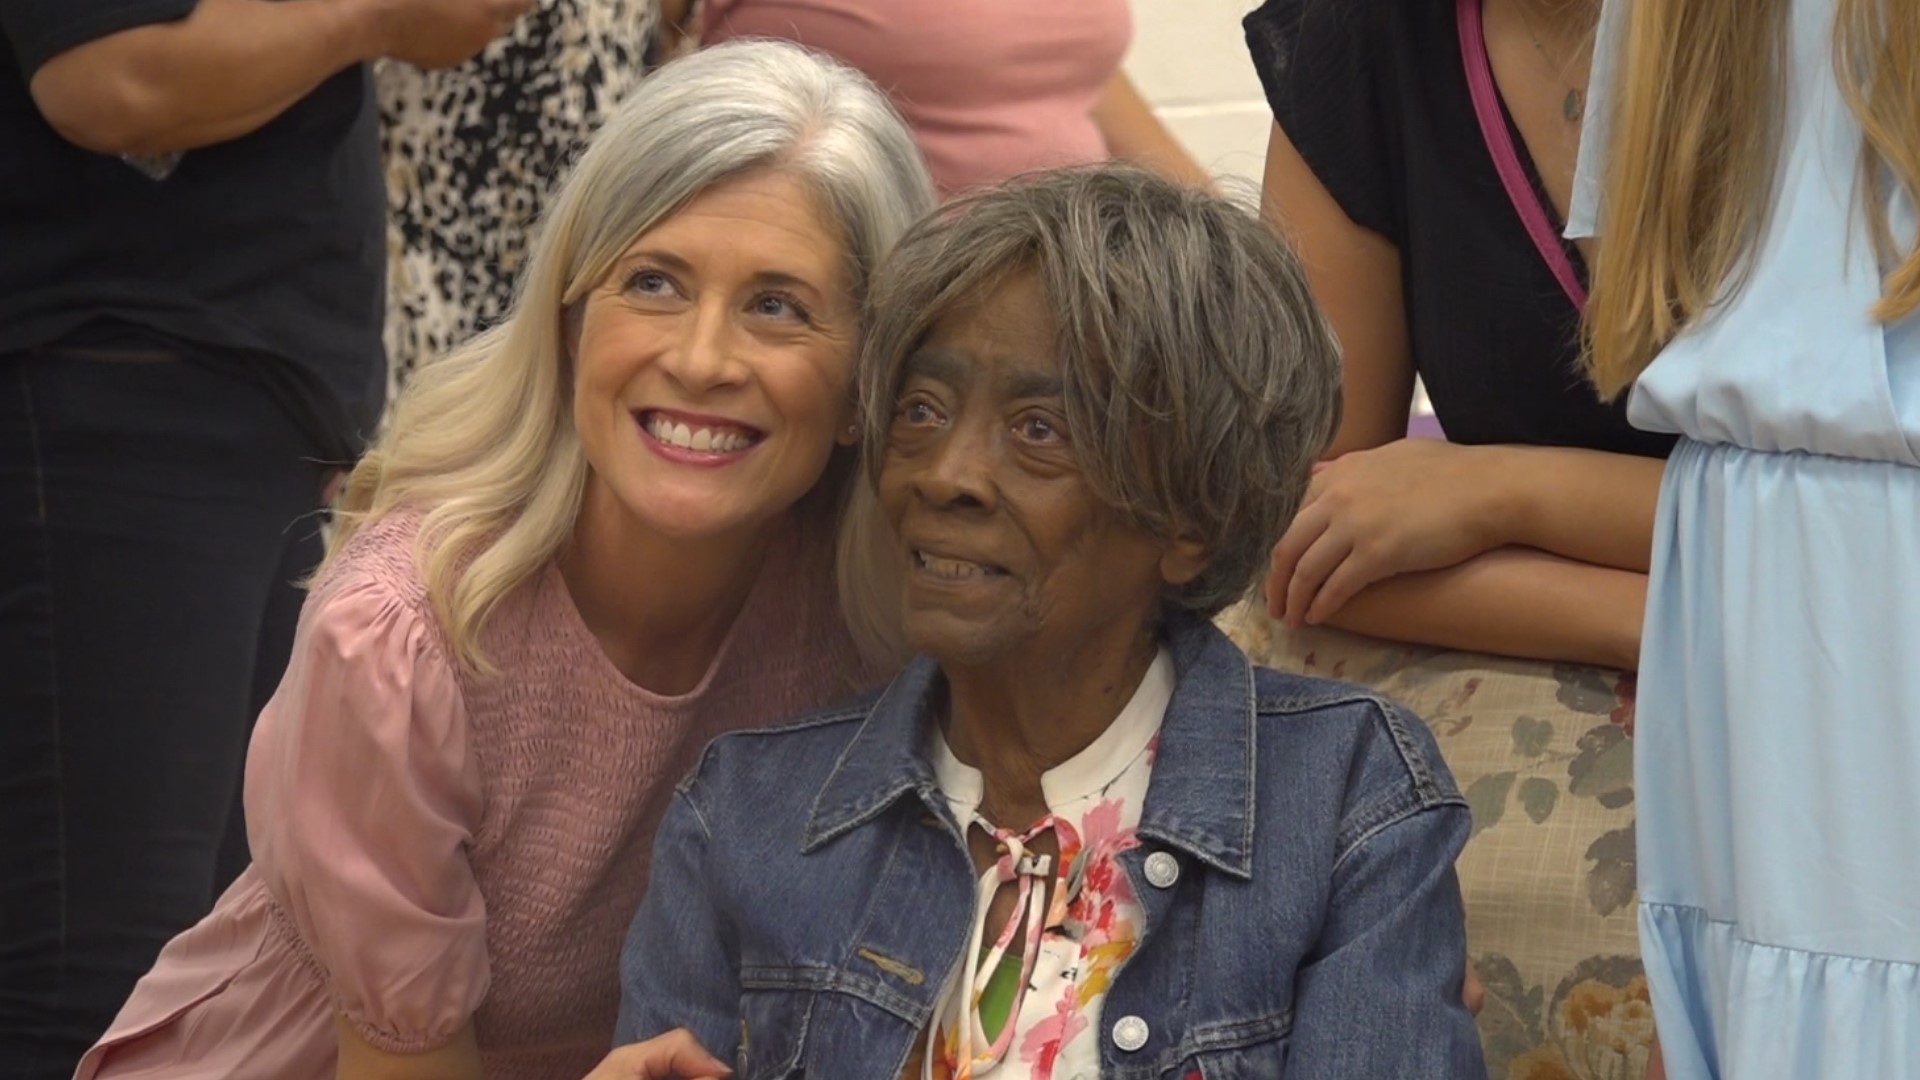 Fayetteville teacher Thelma Thomison retires after 61 years. Teachers and students held a celebration event to say goodbye.